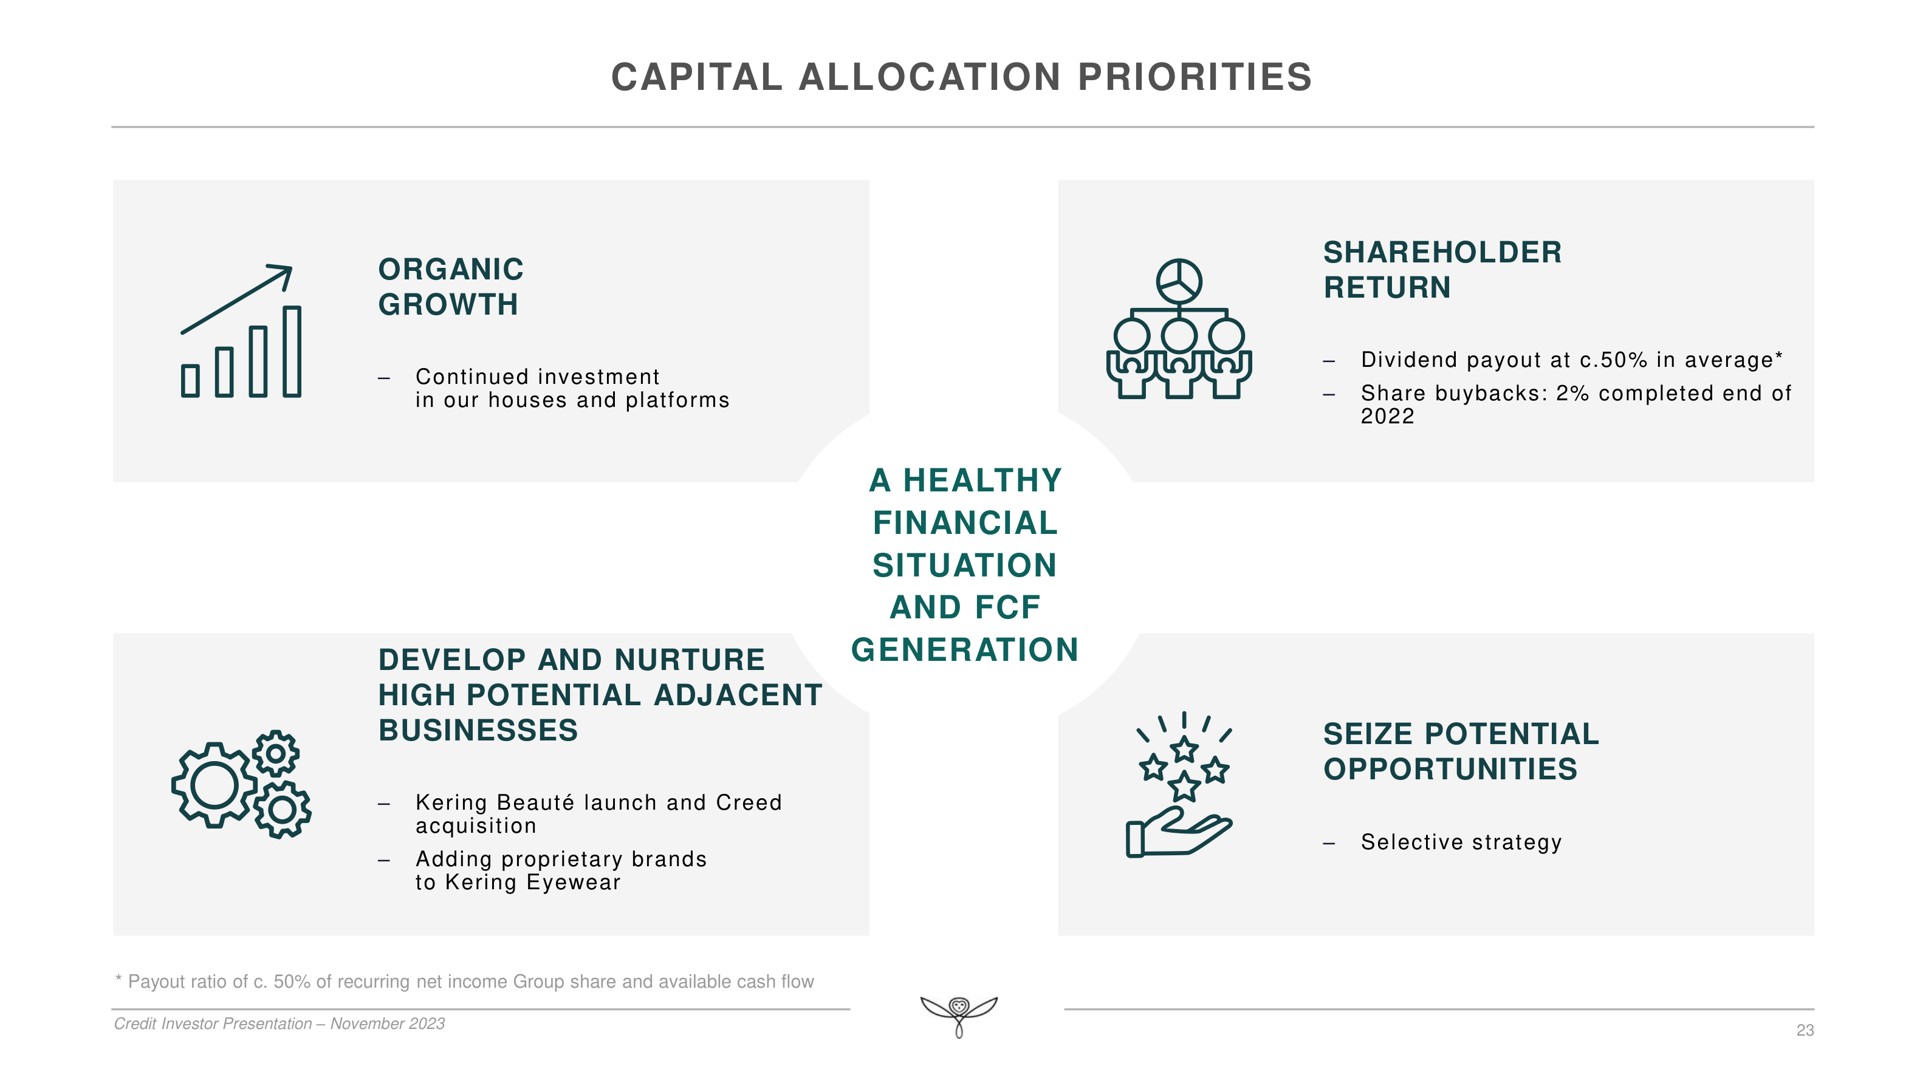 capital allocation priorities a healthy financial situation and generation organic growth shareholder or develop nurture businesses watt seize potential opportunities | Kering